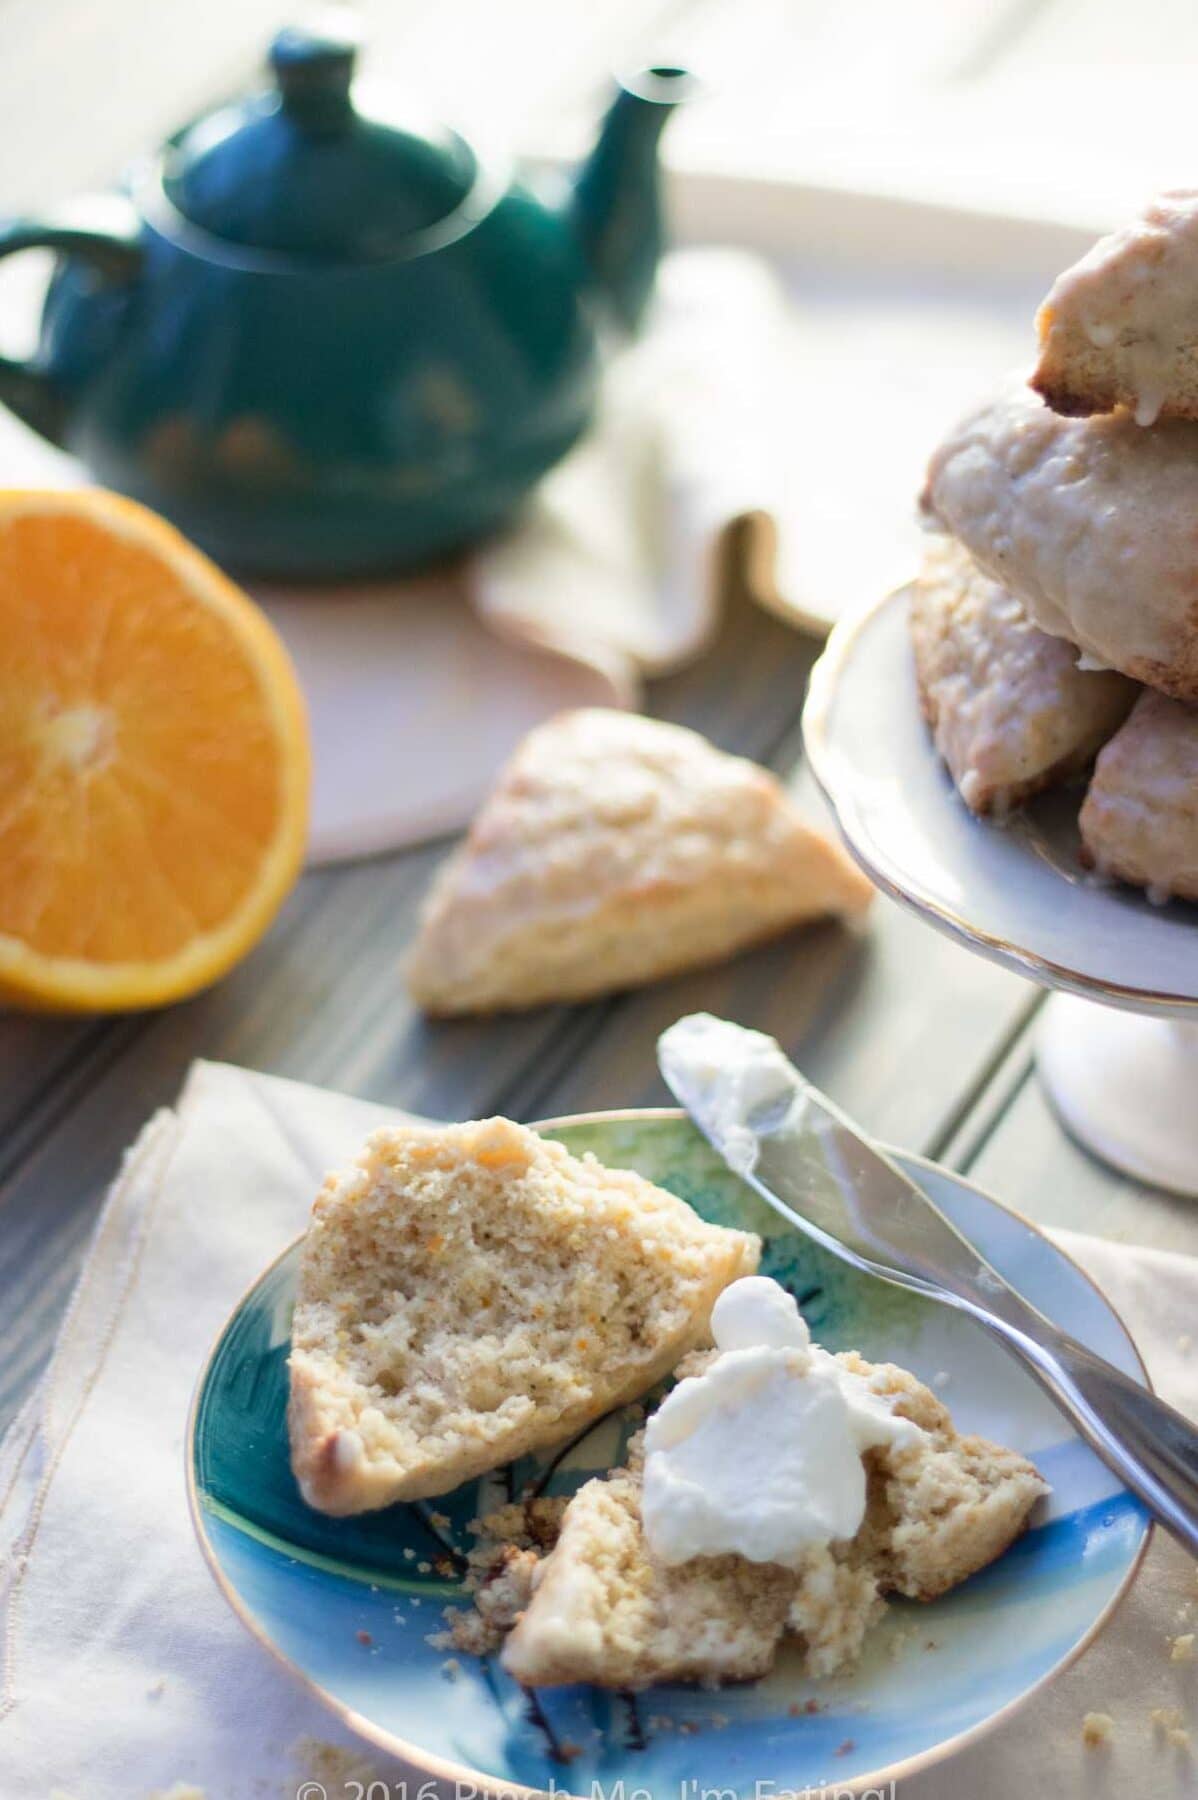 These fragrant cardamom orange scones have a delicate, fresh flavor and just the right crumbly-moist texture — the perfect treat for a bad-weather day.